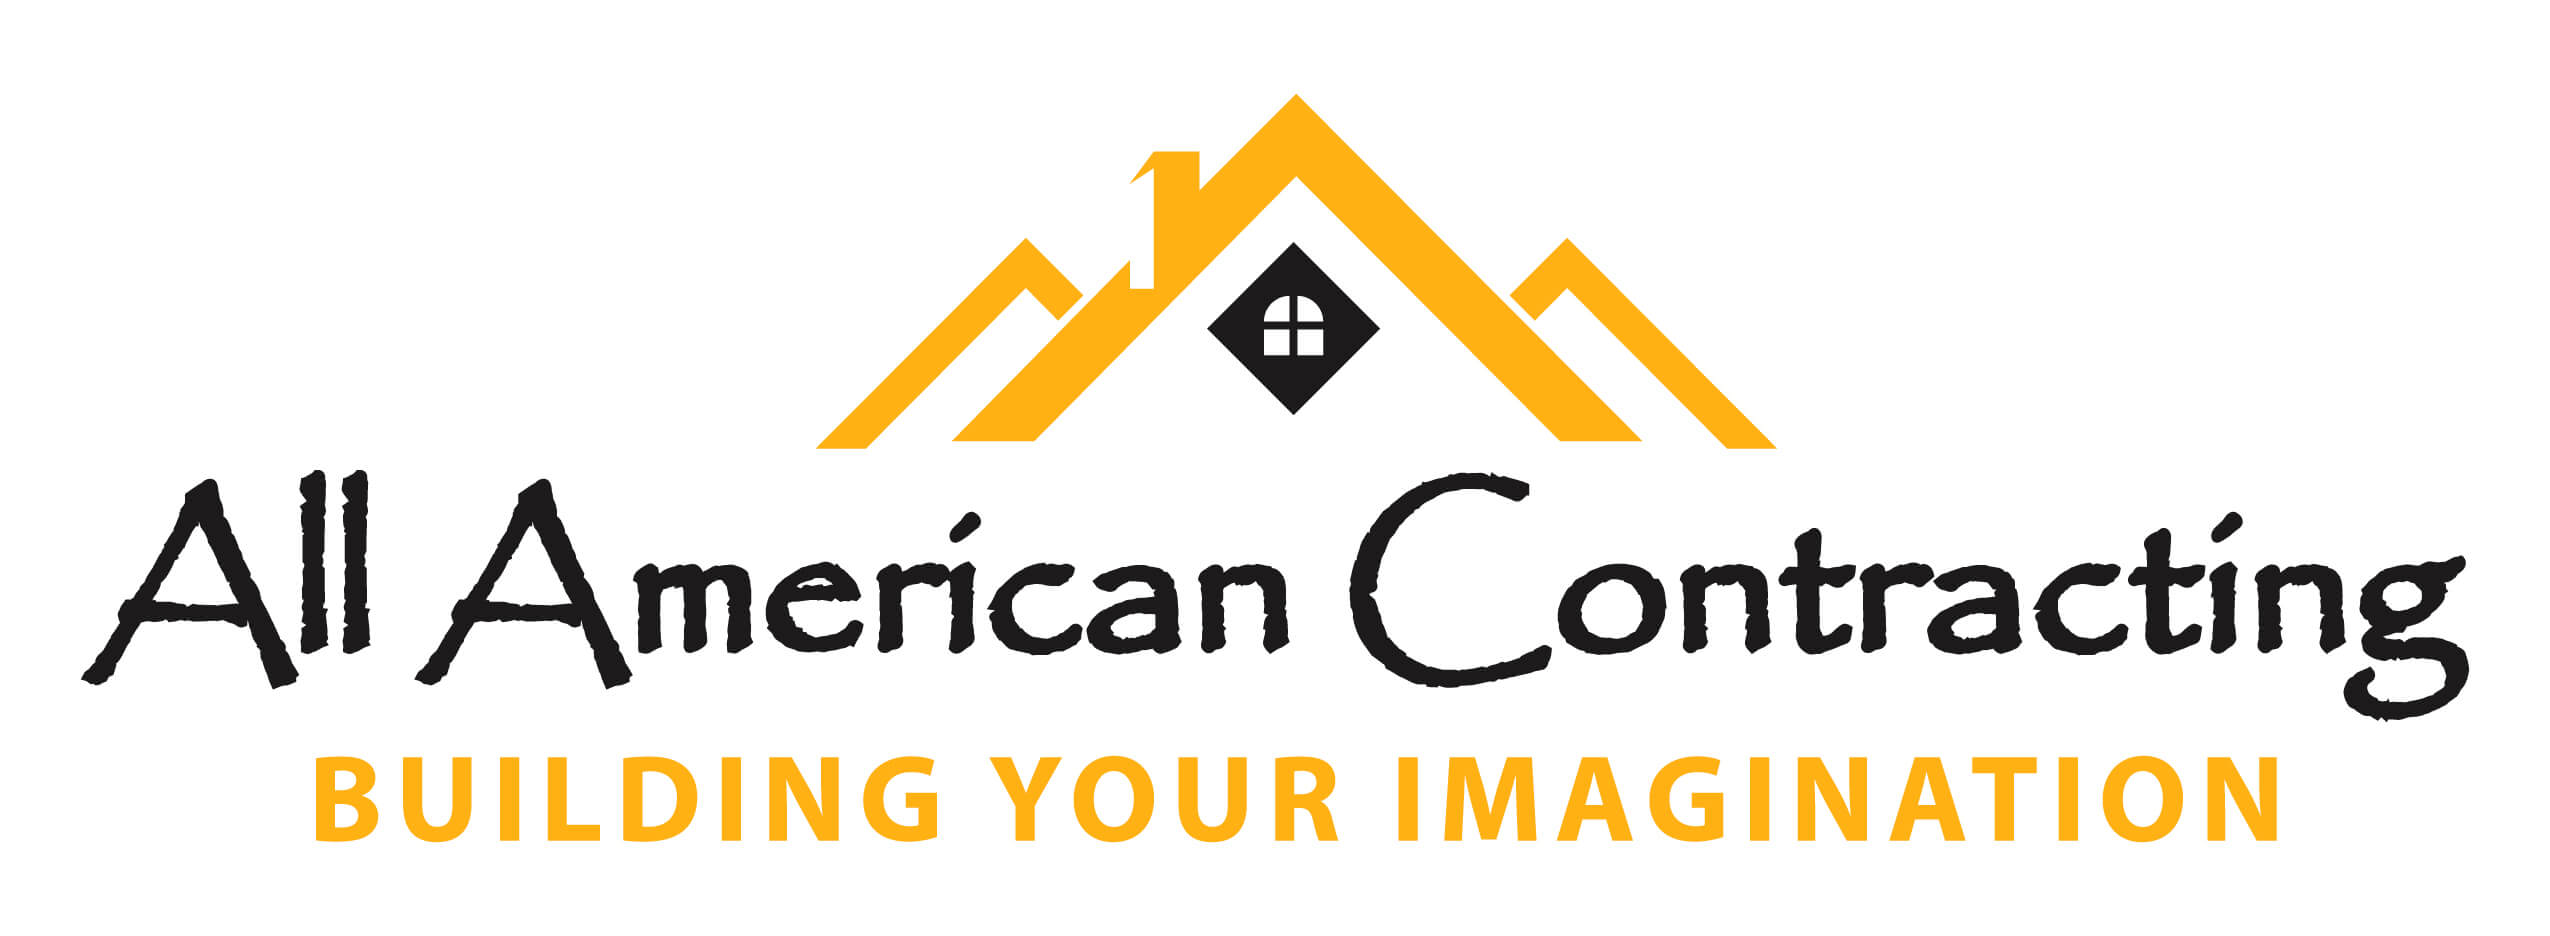 All American Contracting